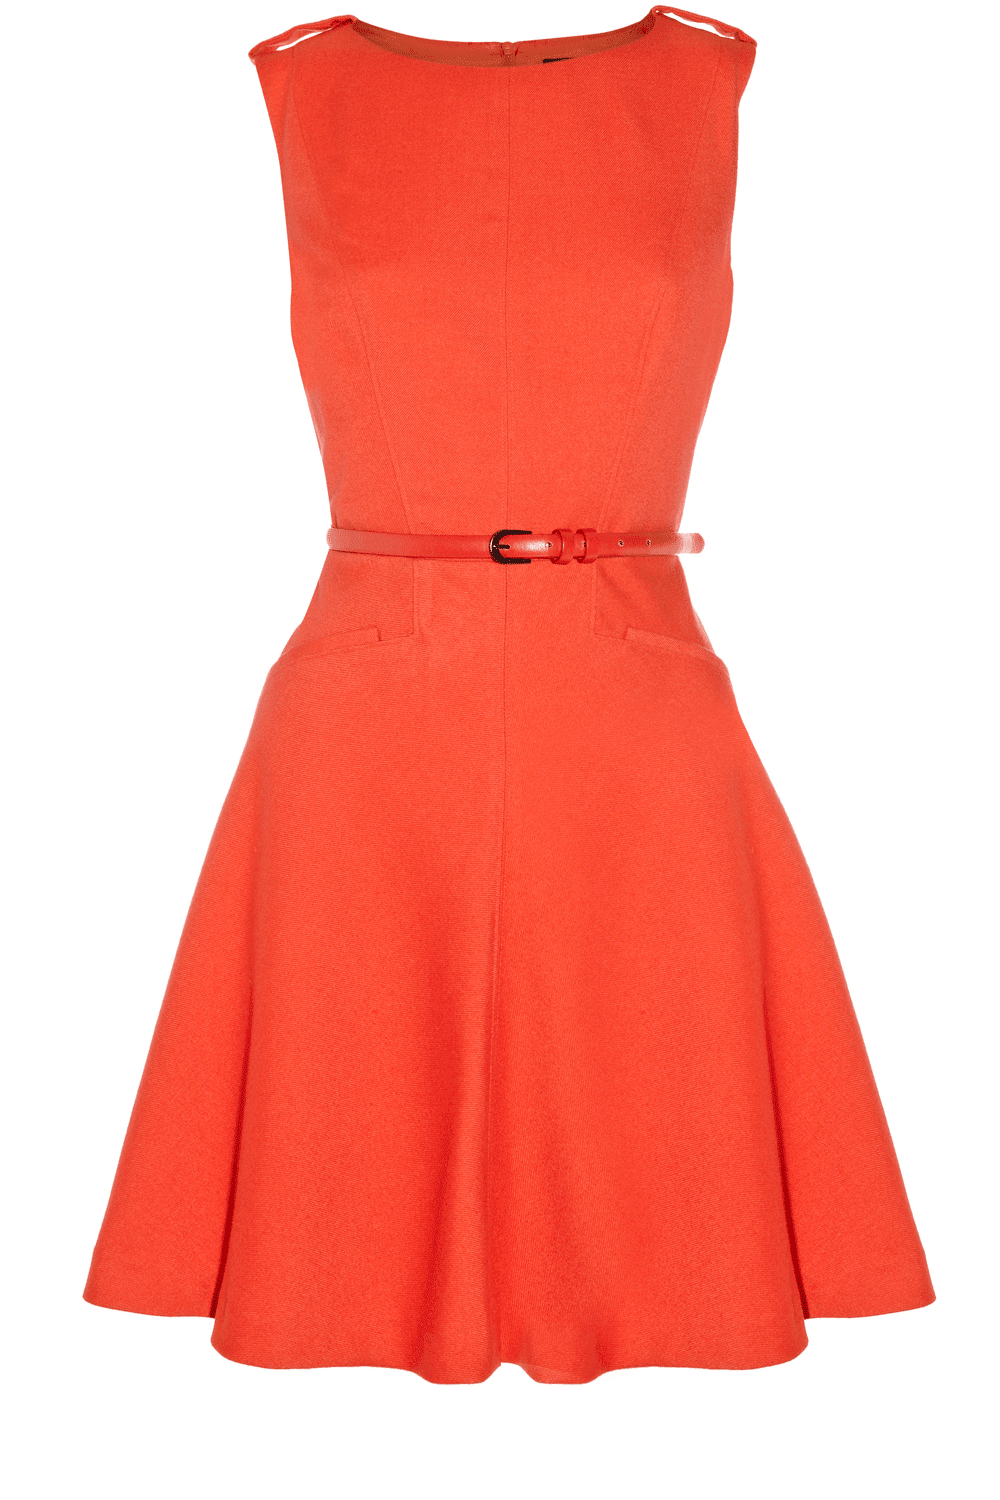 Vogue Quest : Fit and flare dresses